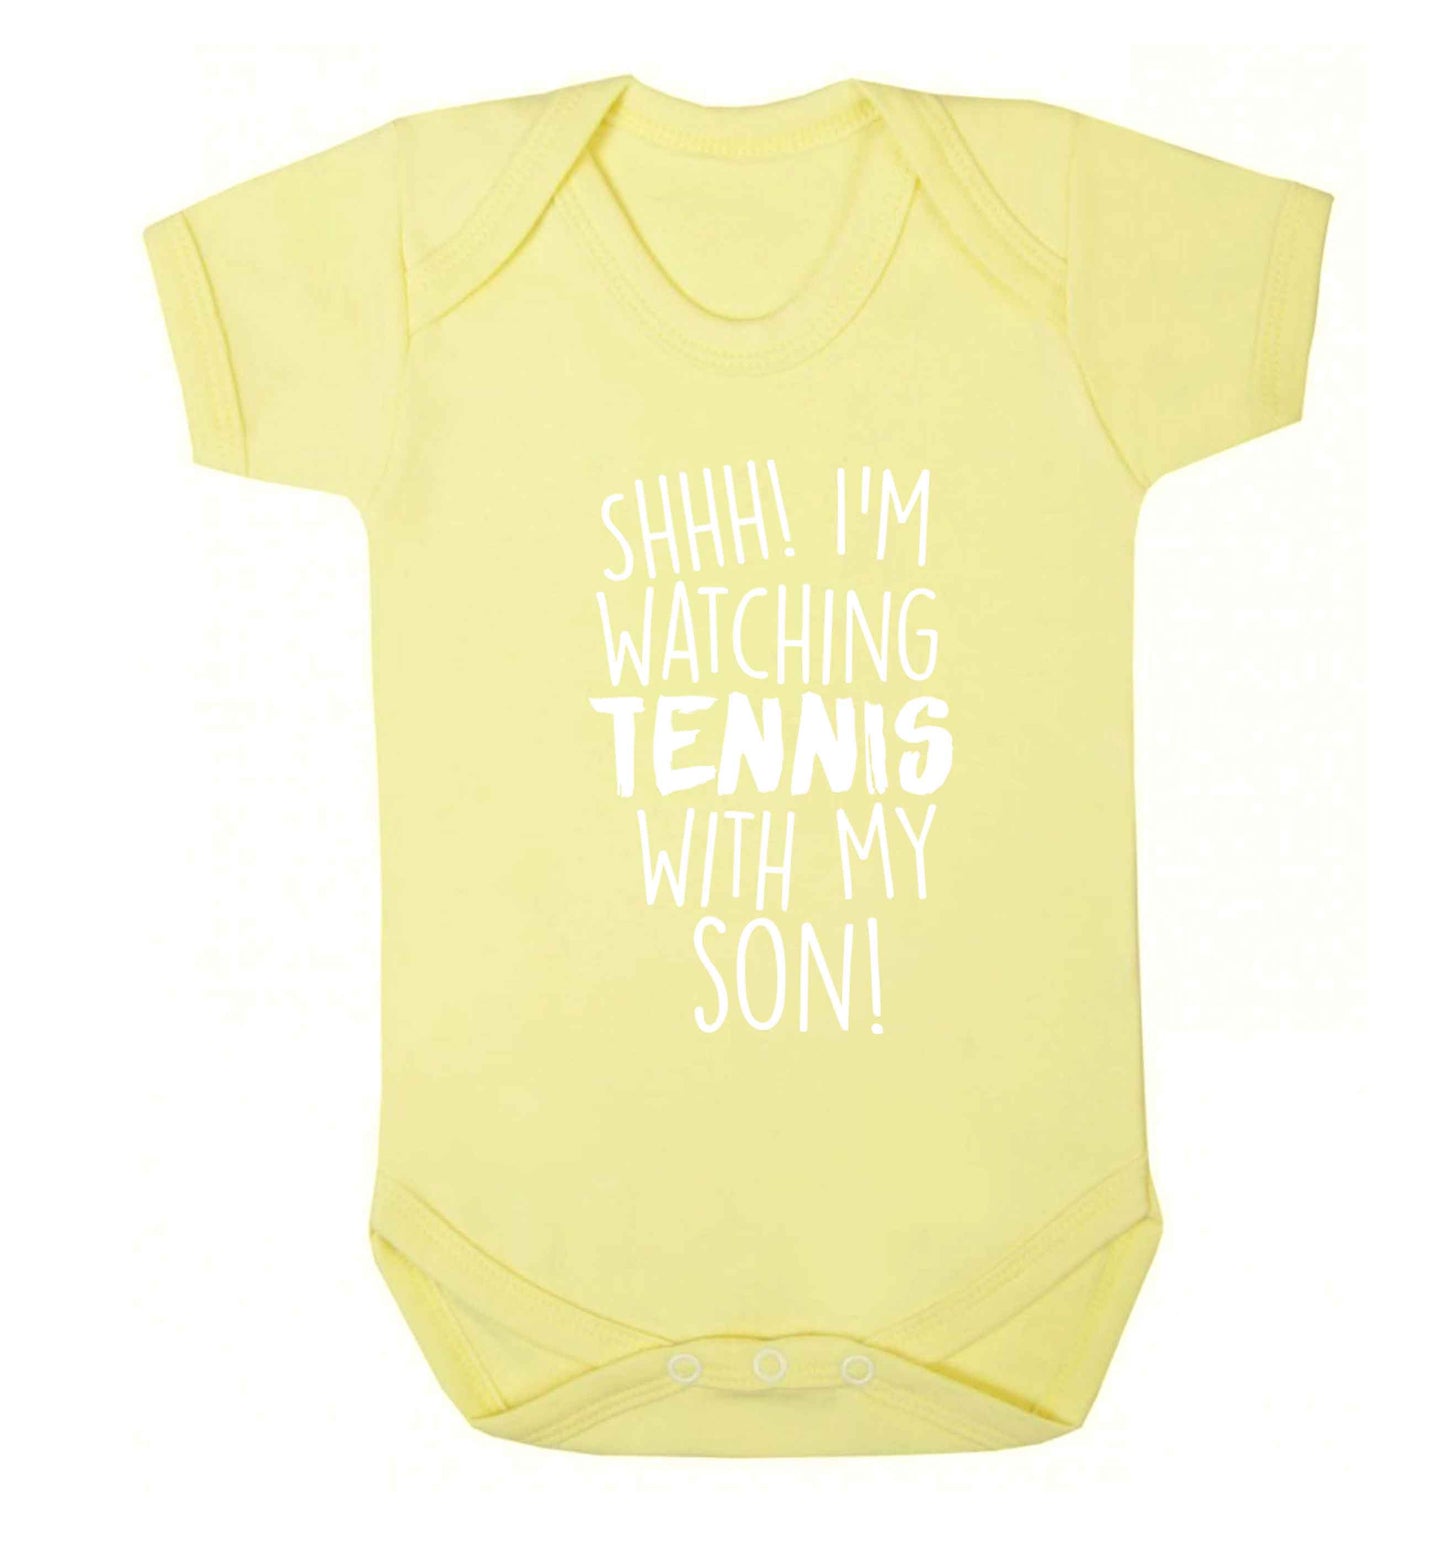 Shh! I'm watching tennis with my son! Baby Vest pale yellow 18-24 months